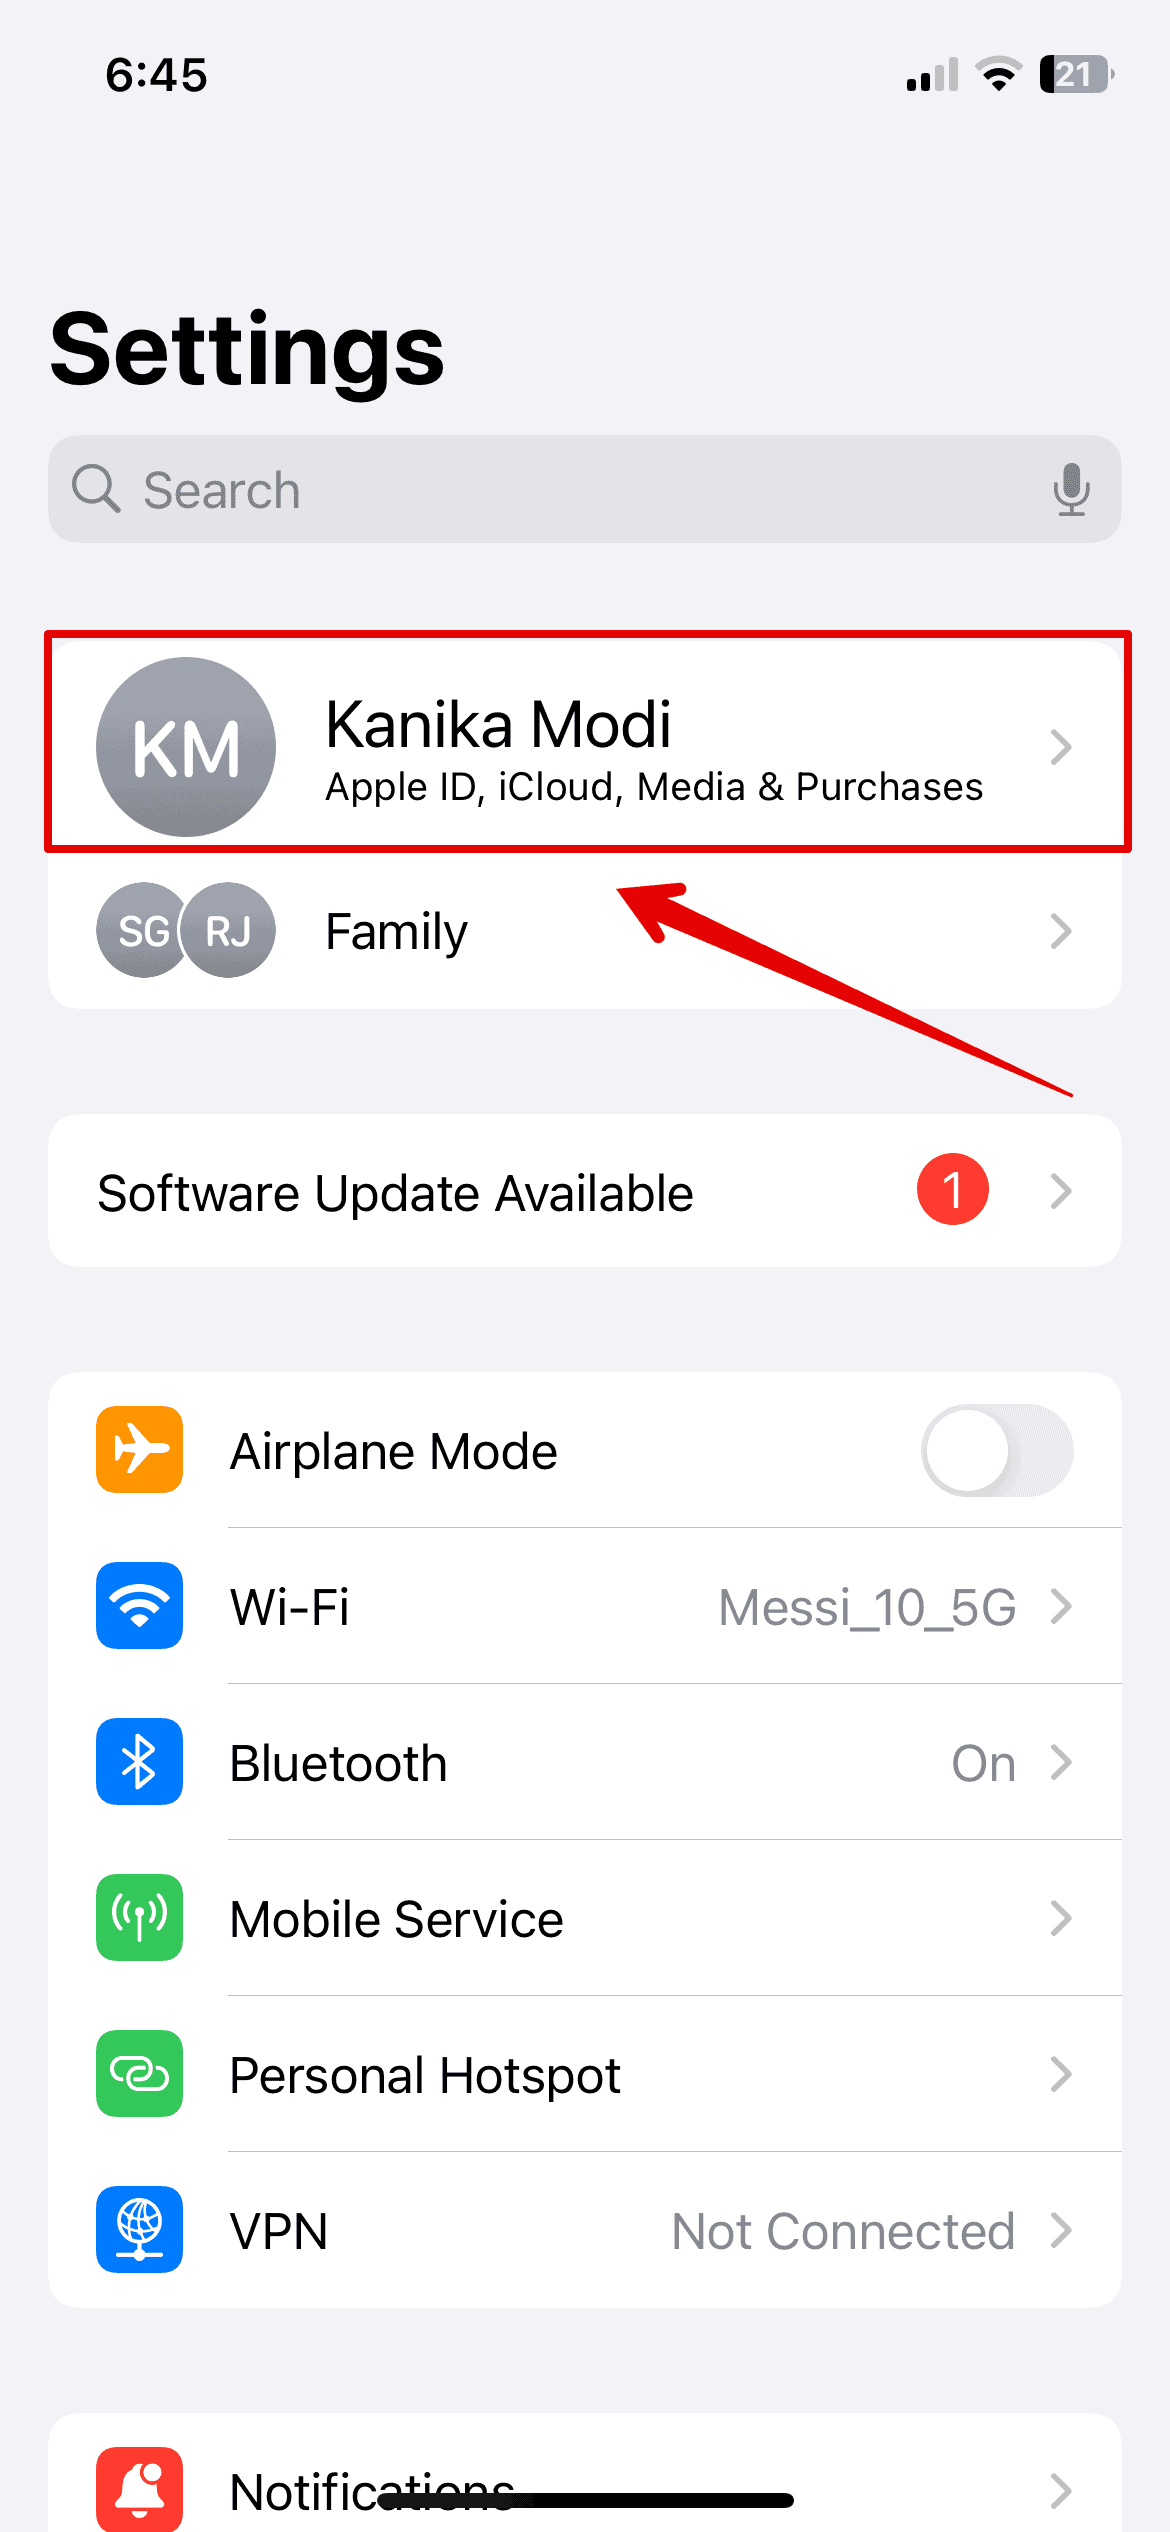 Open Settings and tap on your name